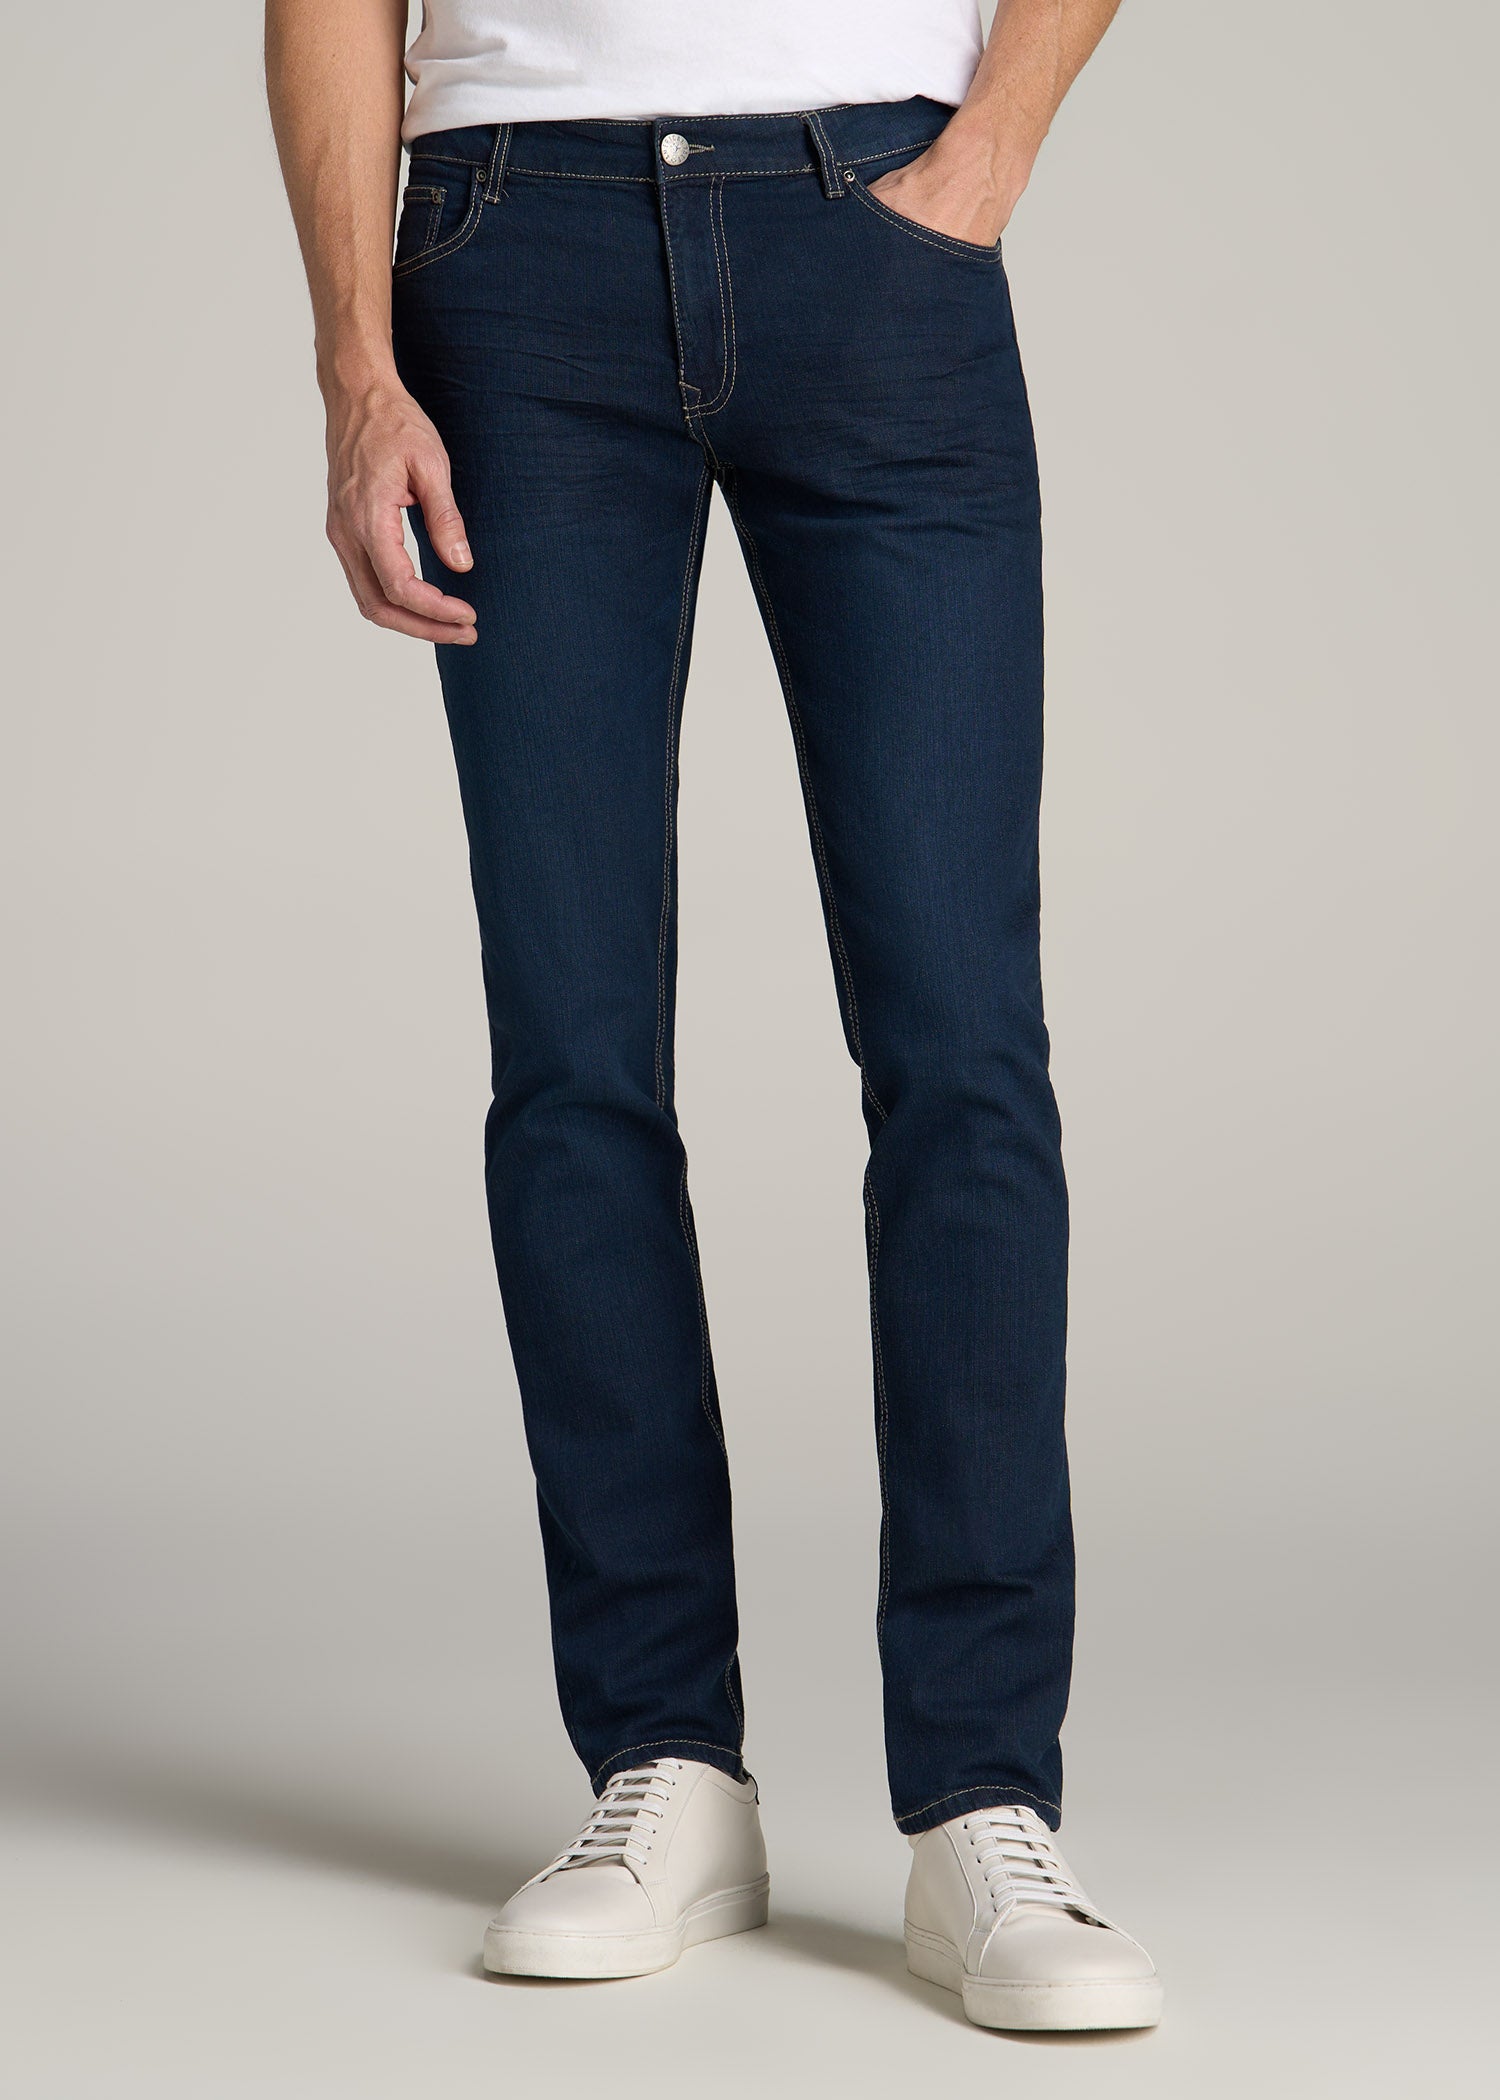 $49 Men's Chinos & Jeans